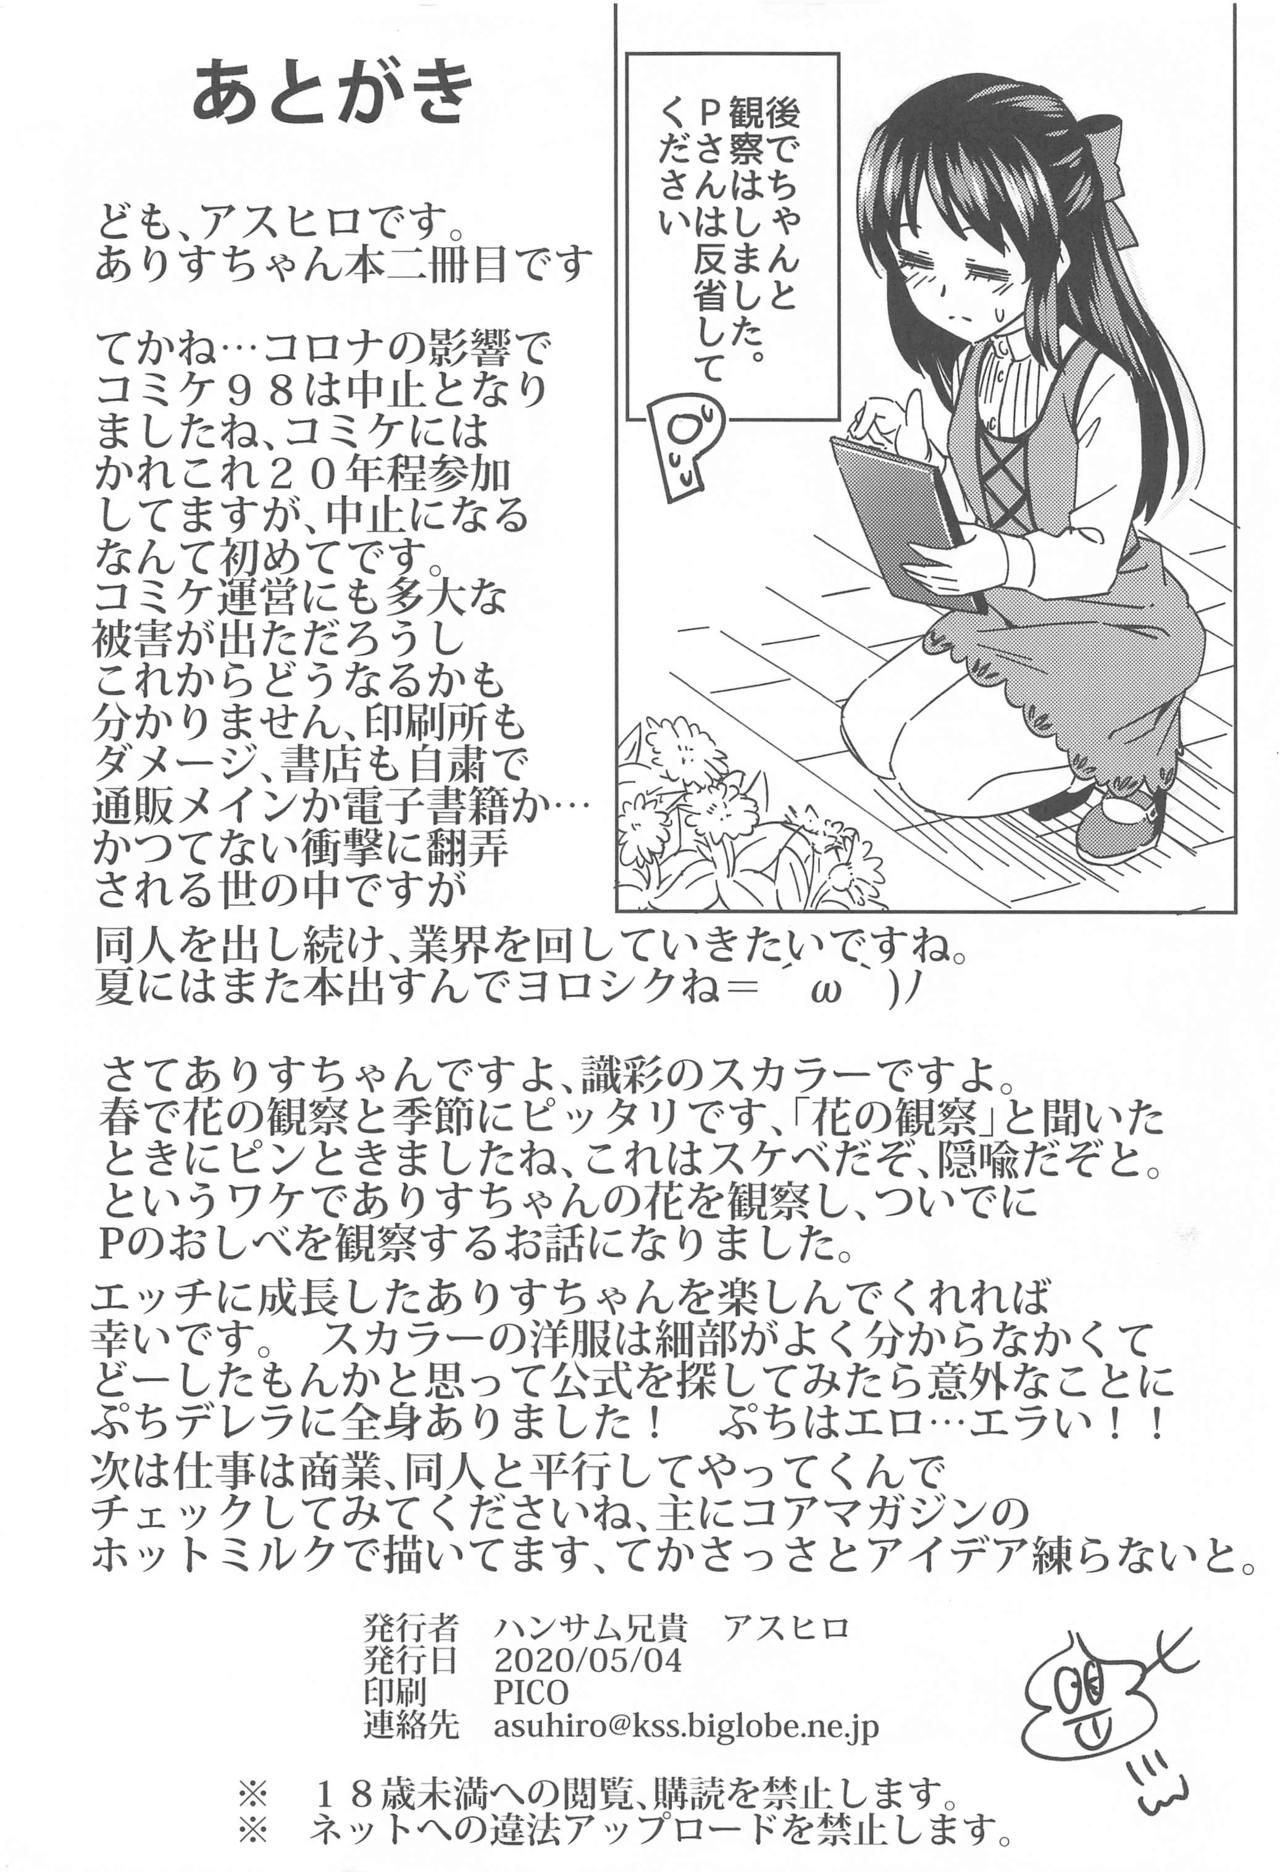 Her Moegiiro no Step - The idolmaster Best Blow Job - Page 25